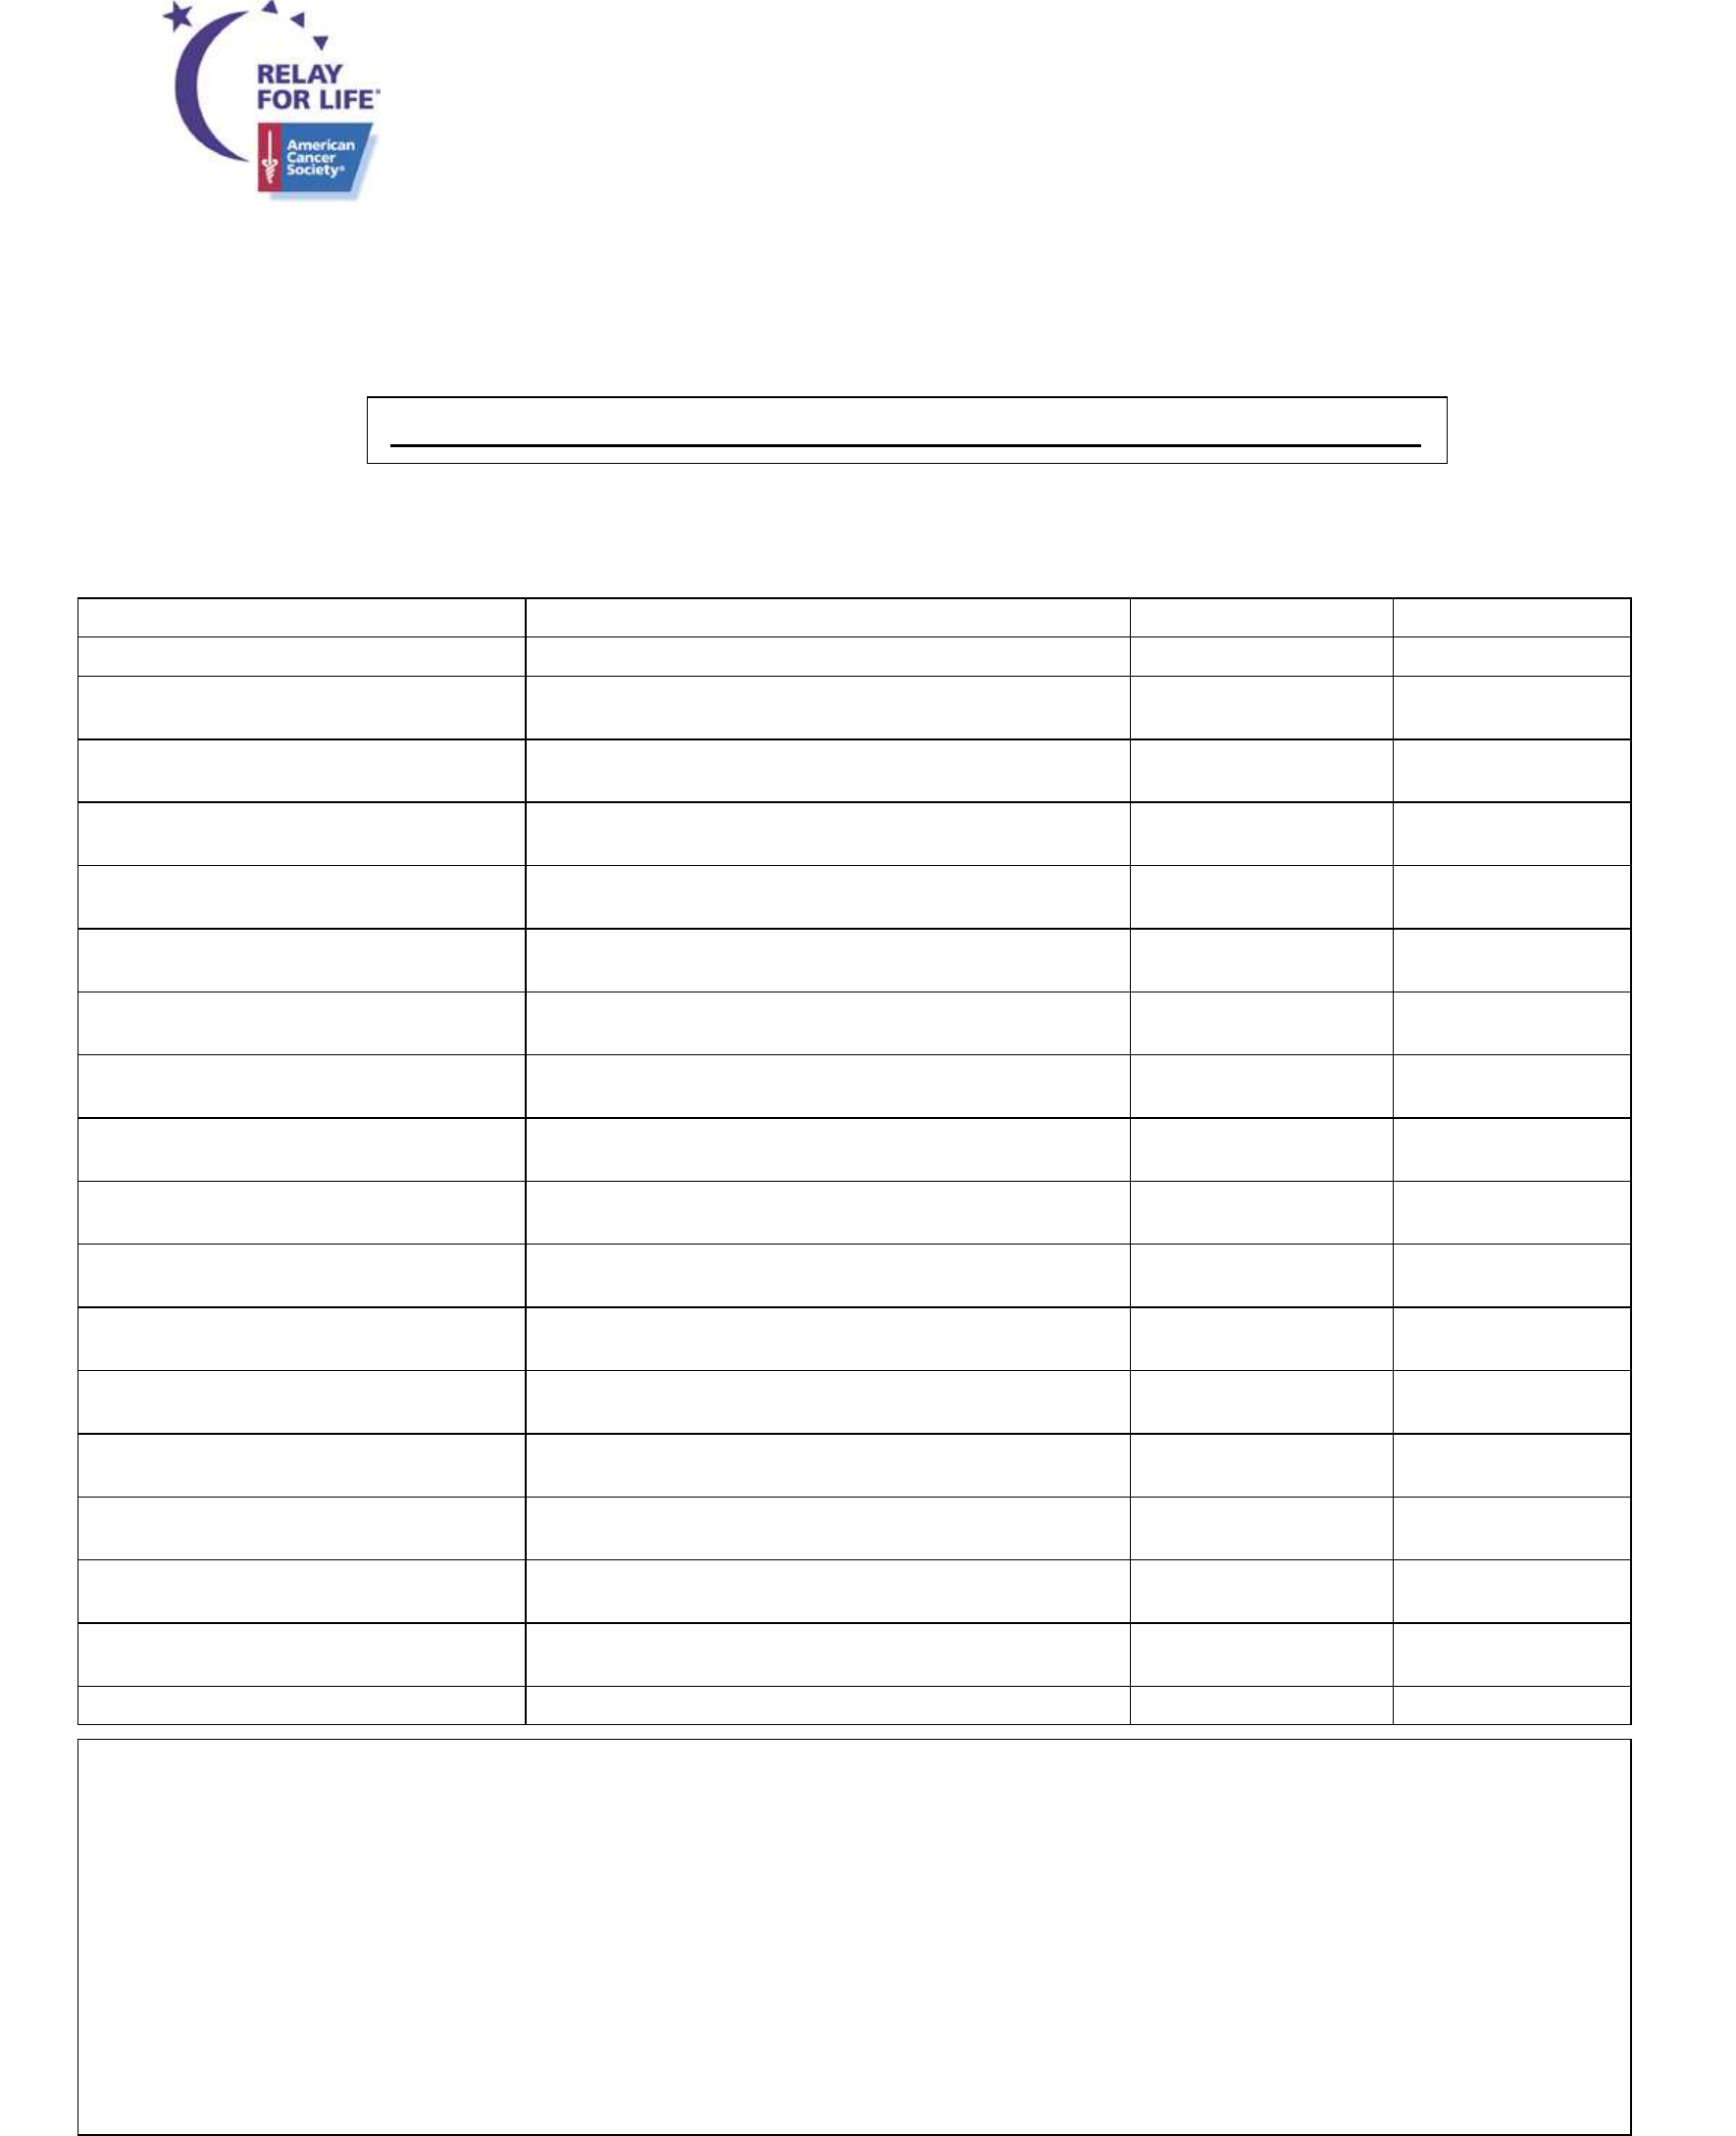 Relay For Life Donation Form – America Free Download With Blank Sponsor Form Template Free